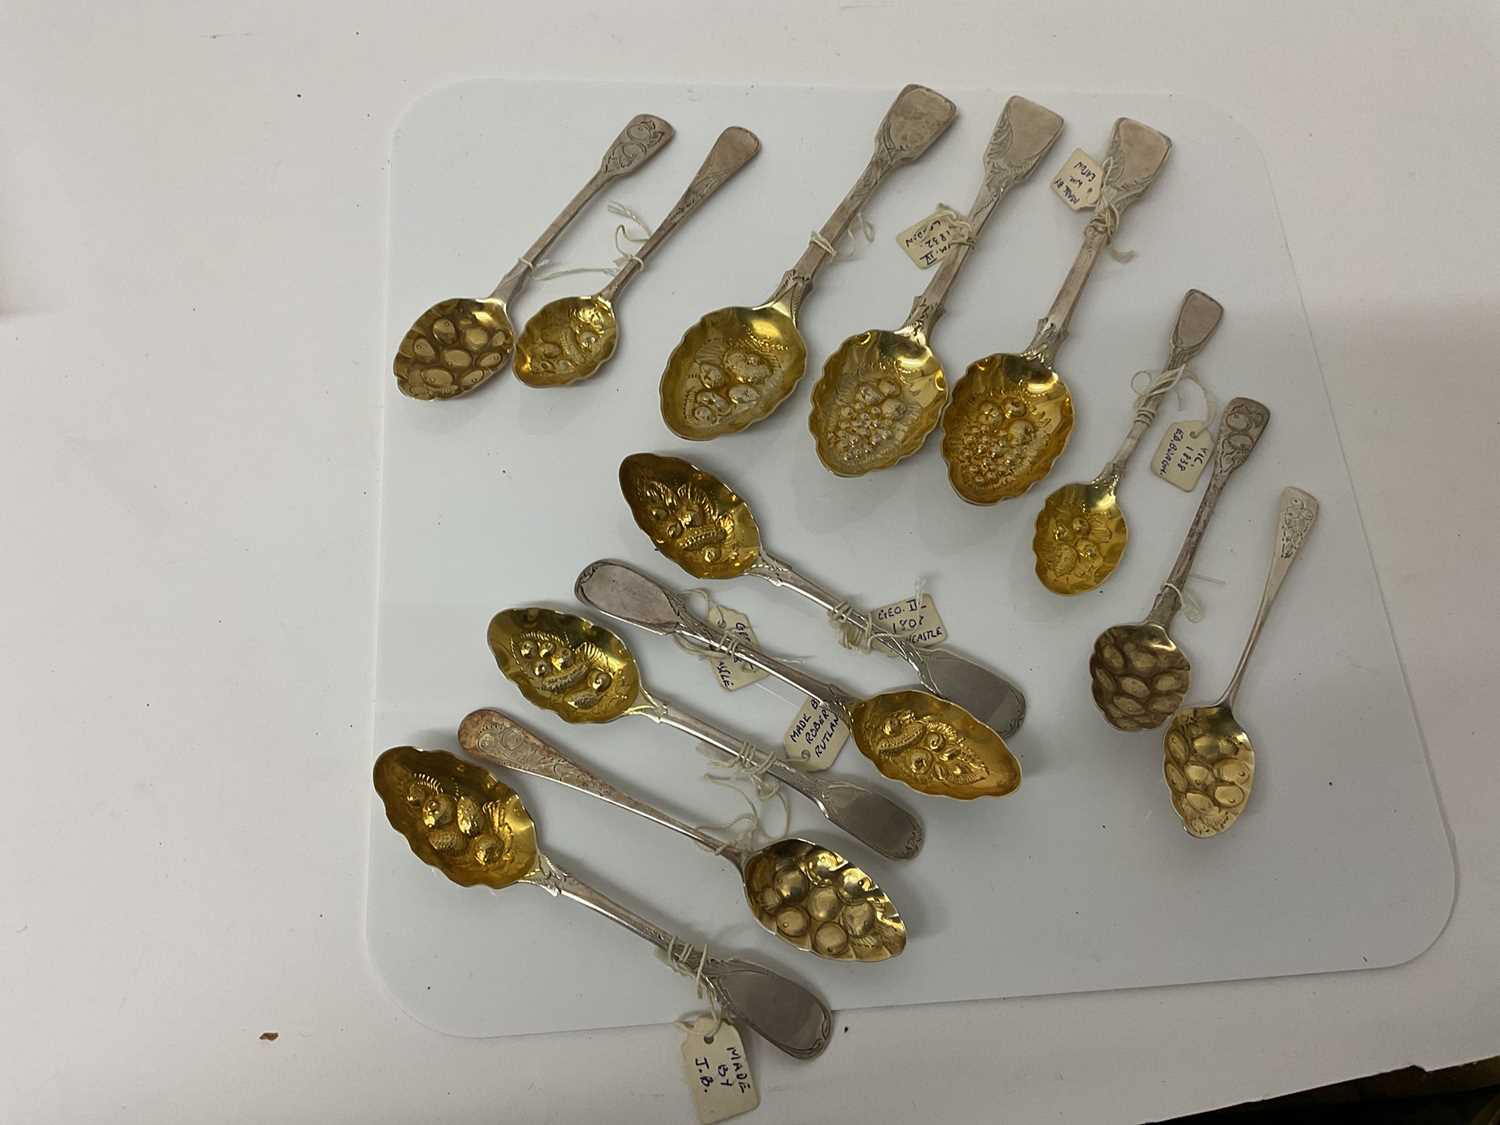 Lot 50 - Group of ten Georgian and later silver tea and desert spoons with later chased and embossed 'Berry spoon' decoration, (various dates and makers)